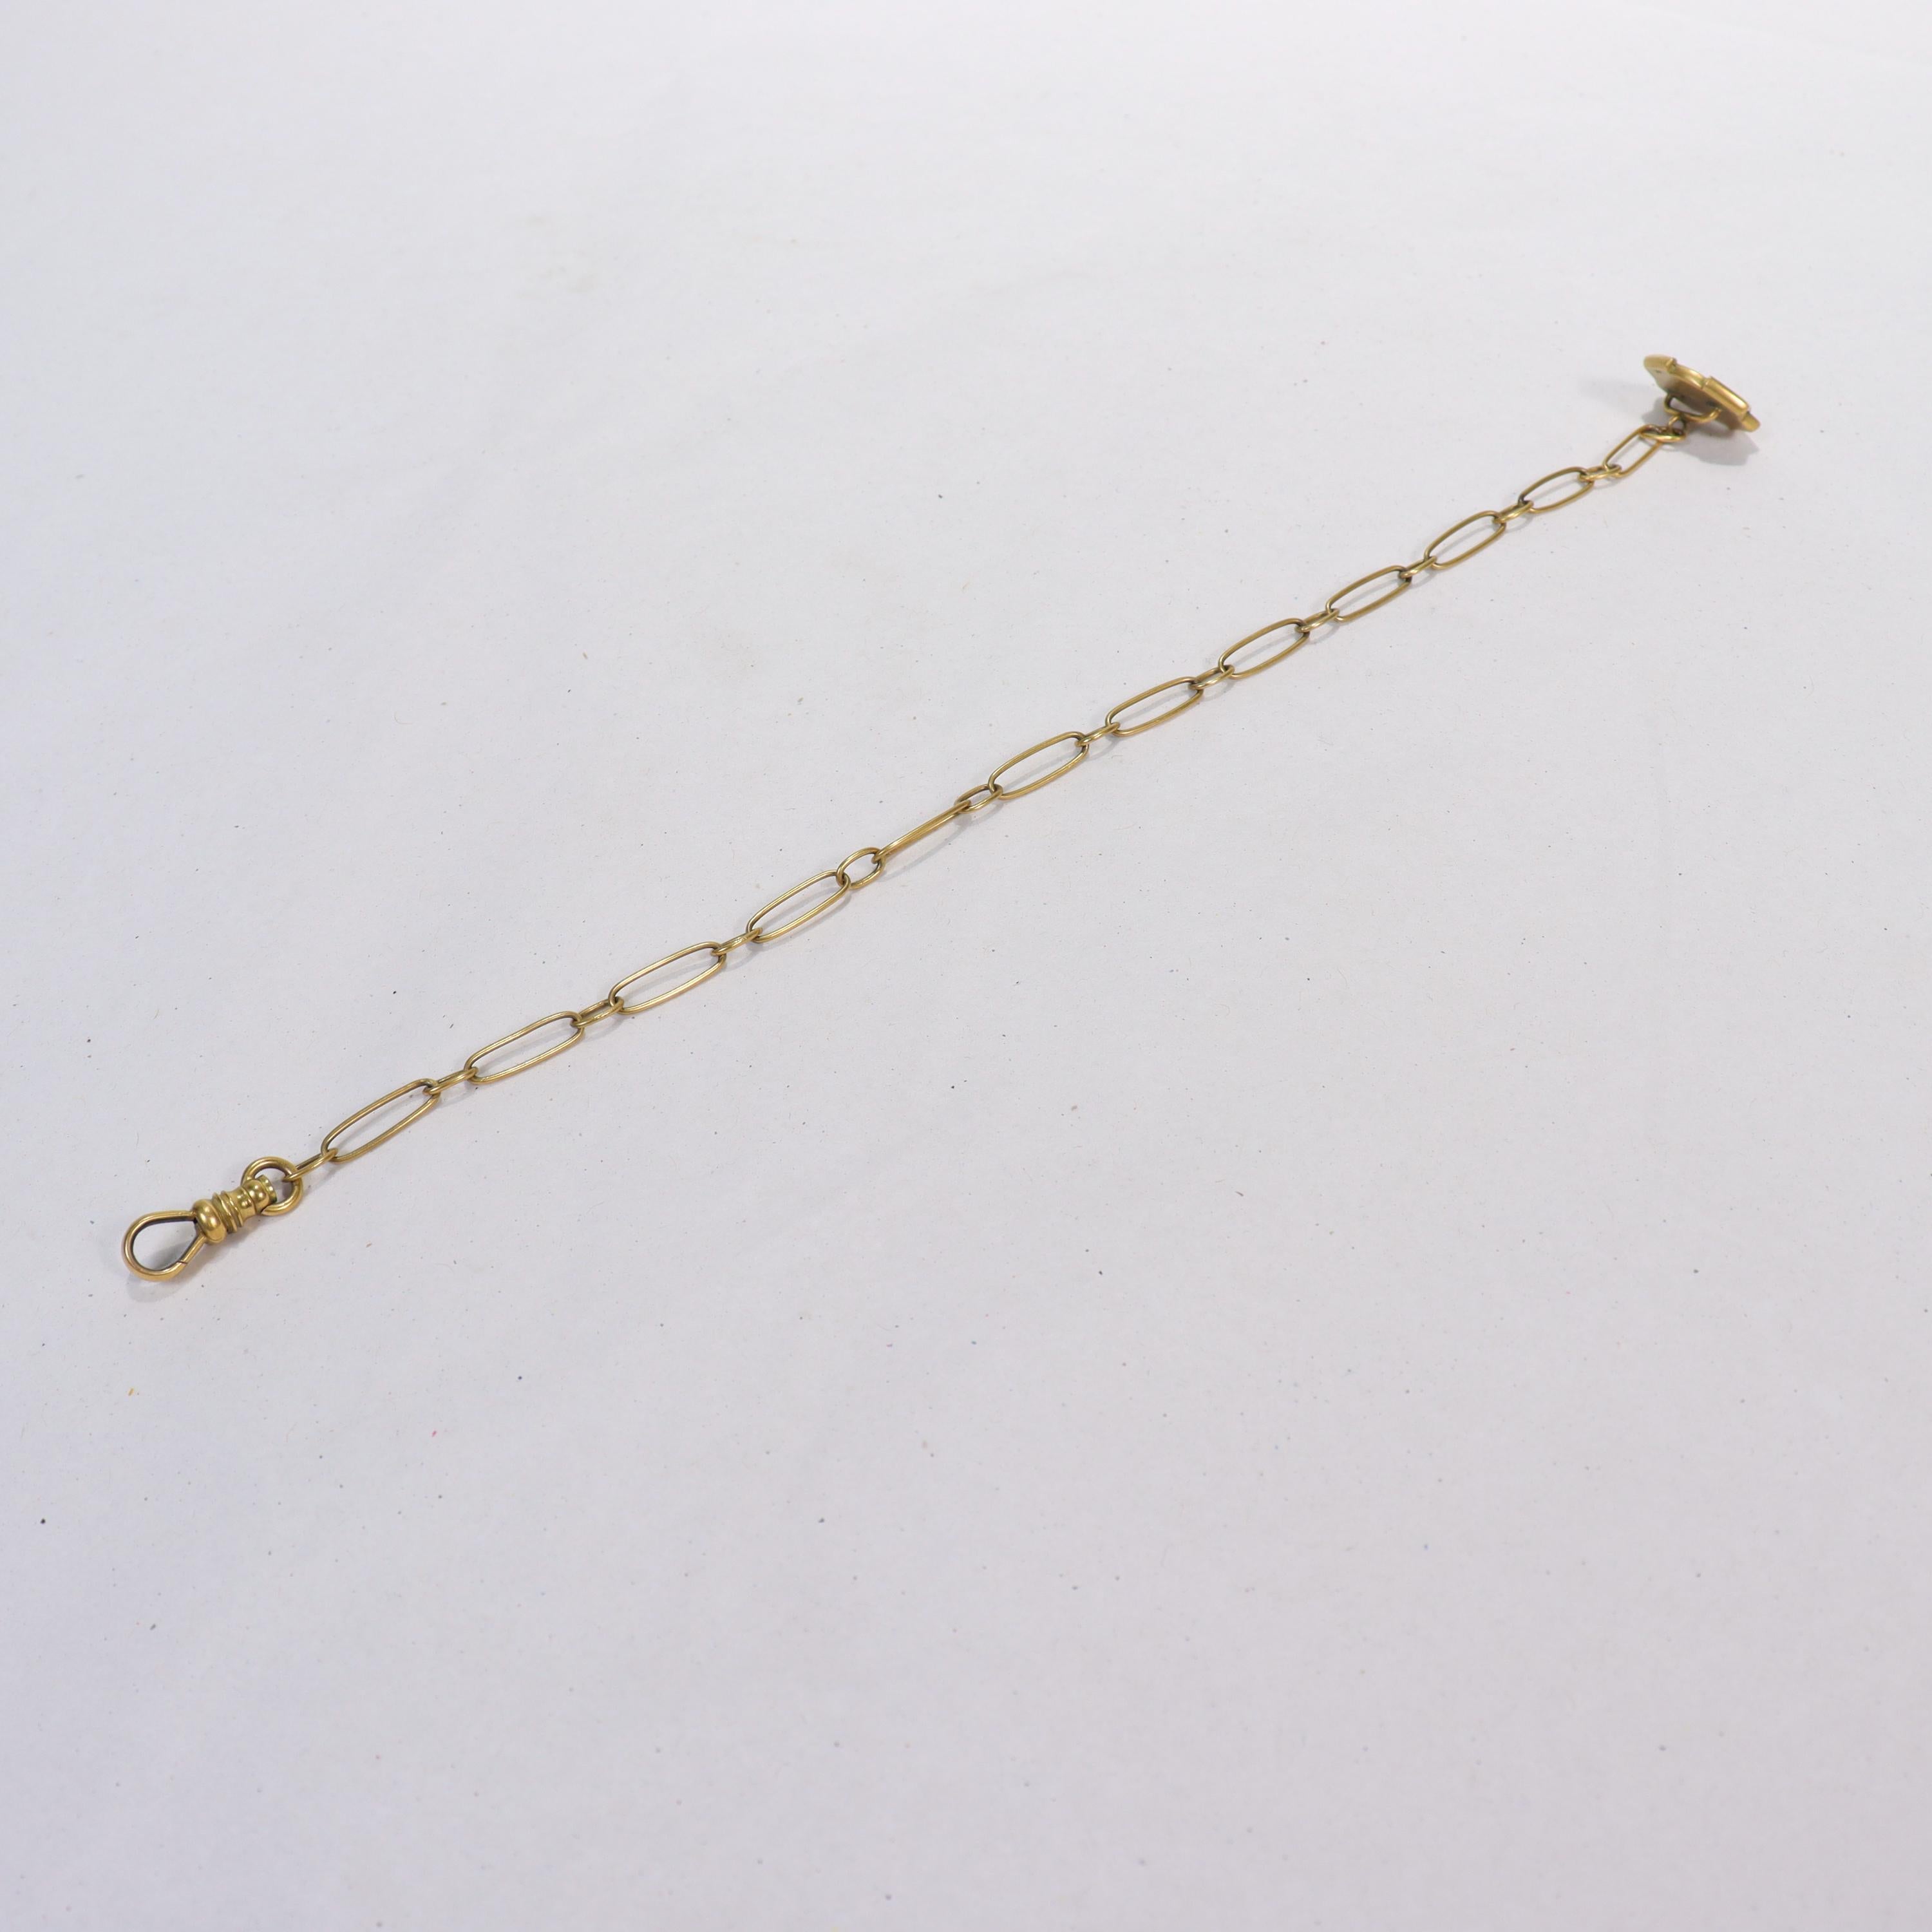 Antique Kalo Shop 14K Gold American Arts & Crafts Pocket Watch Chain In Good Condition For Sale In Philadelphia, PA